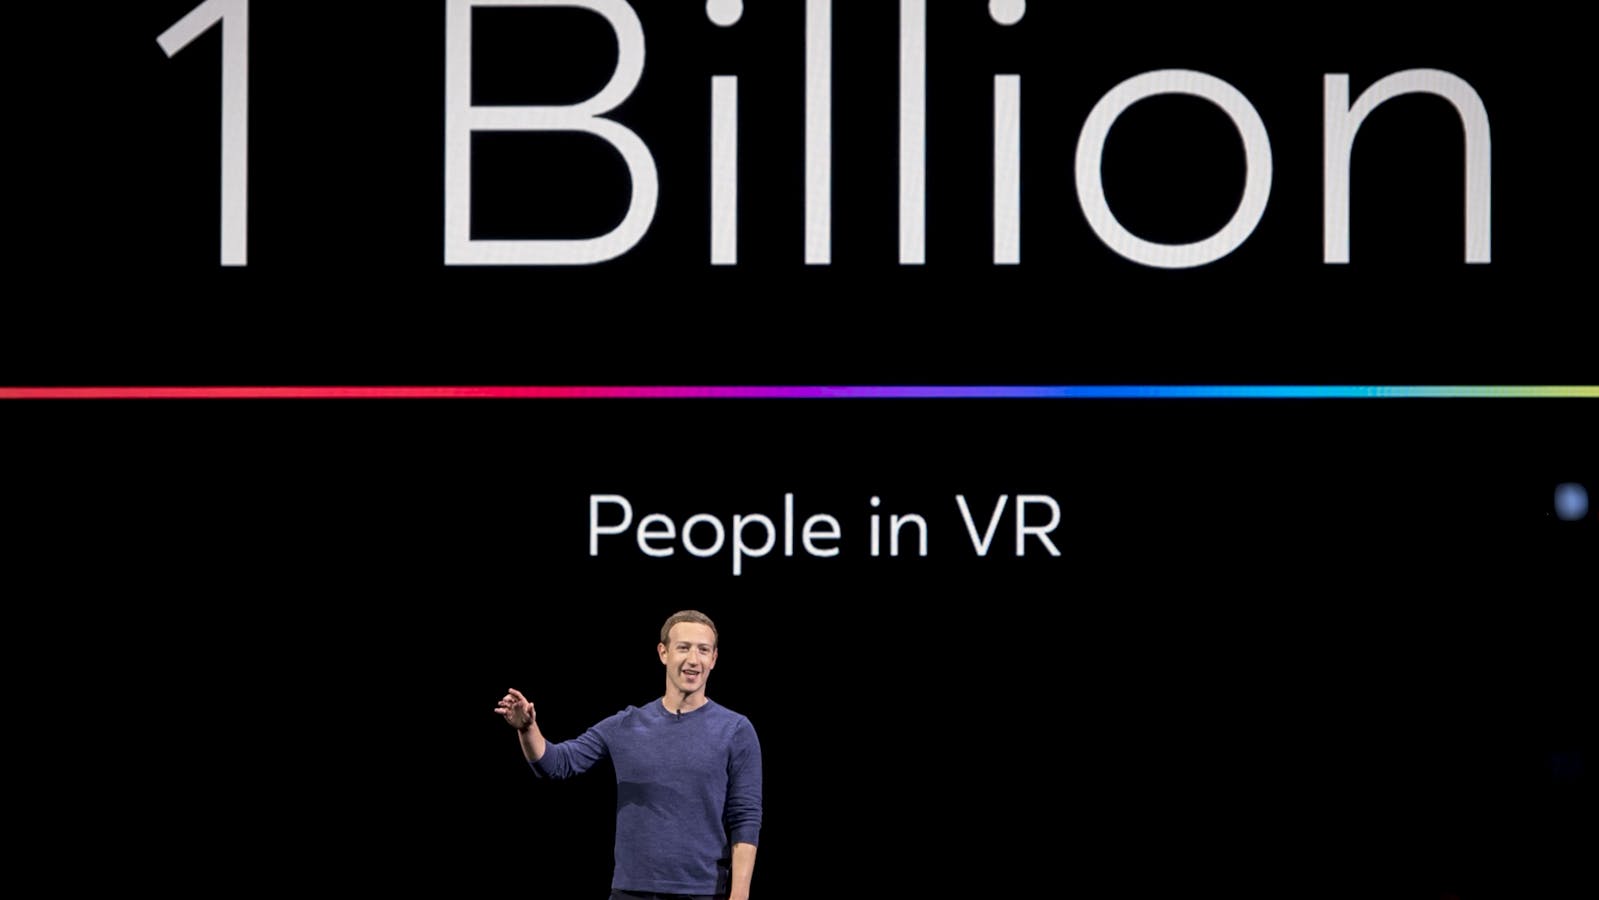 Facebook CEO Mark Zuckerberg at an Oculus event in 2018. Photo by Bloomberg